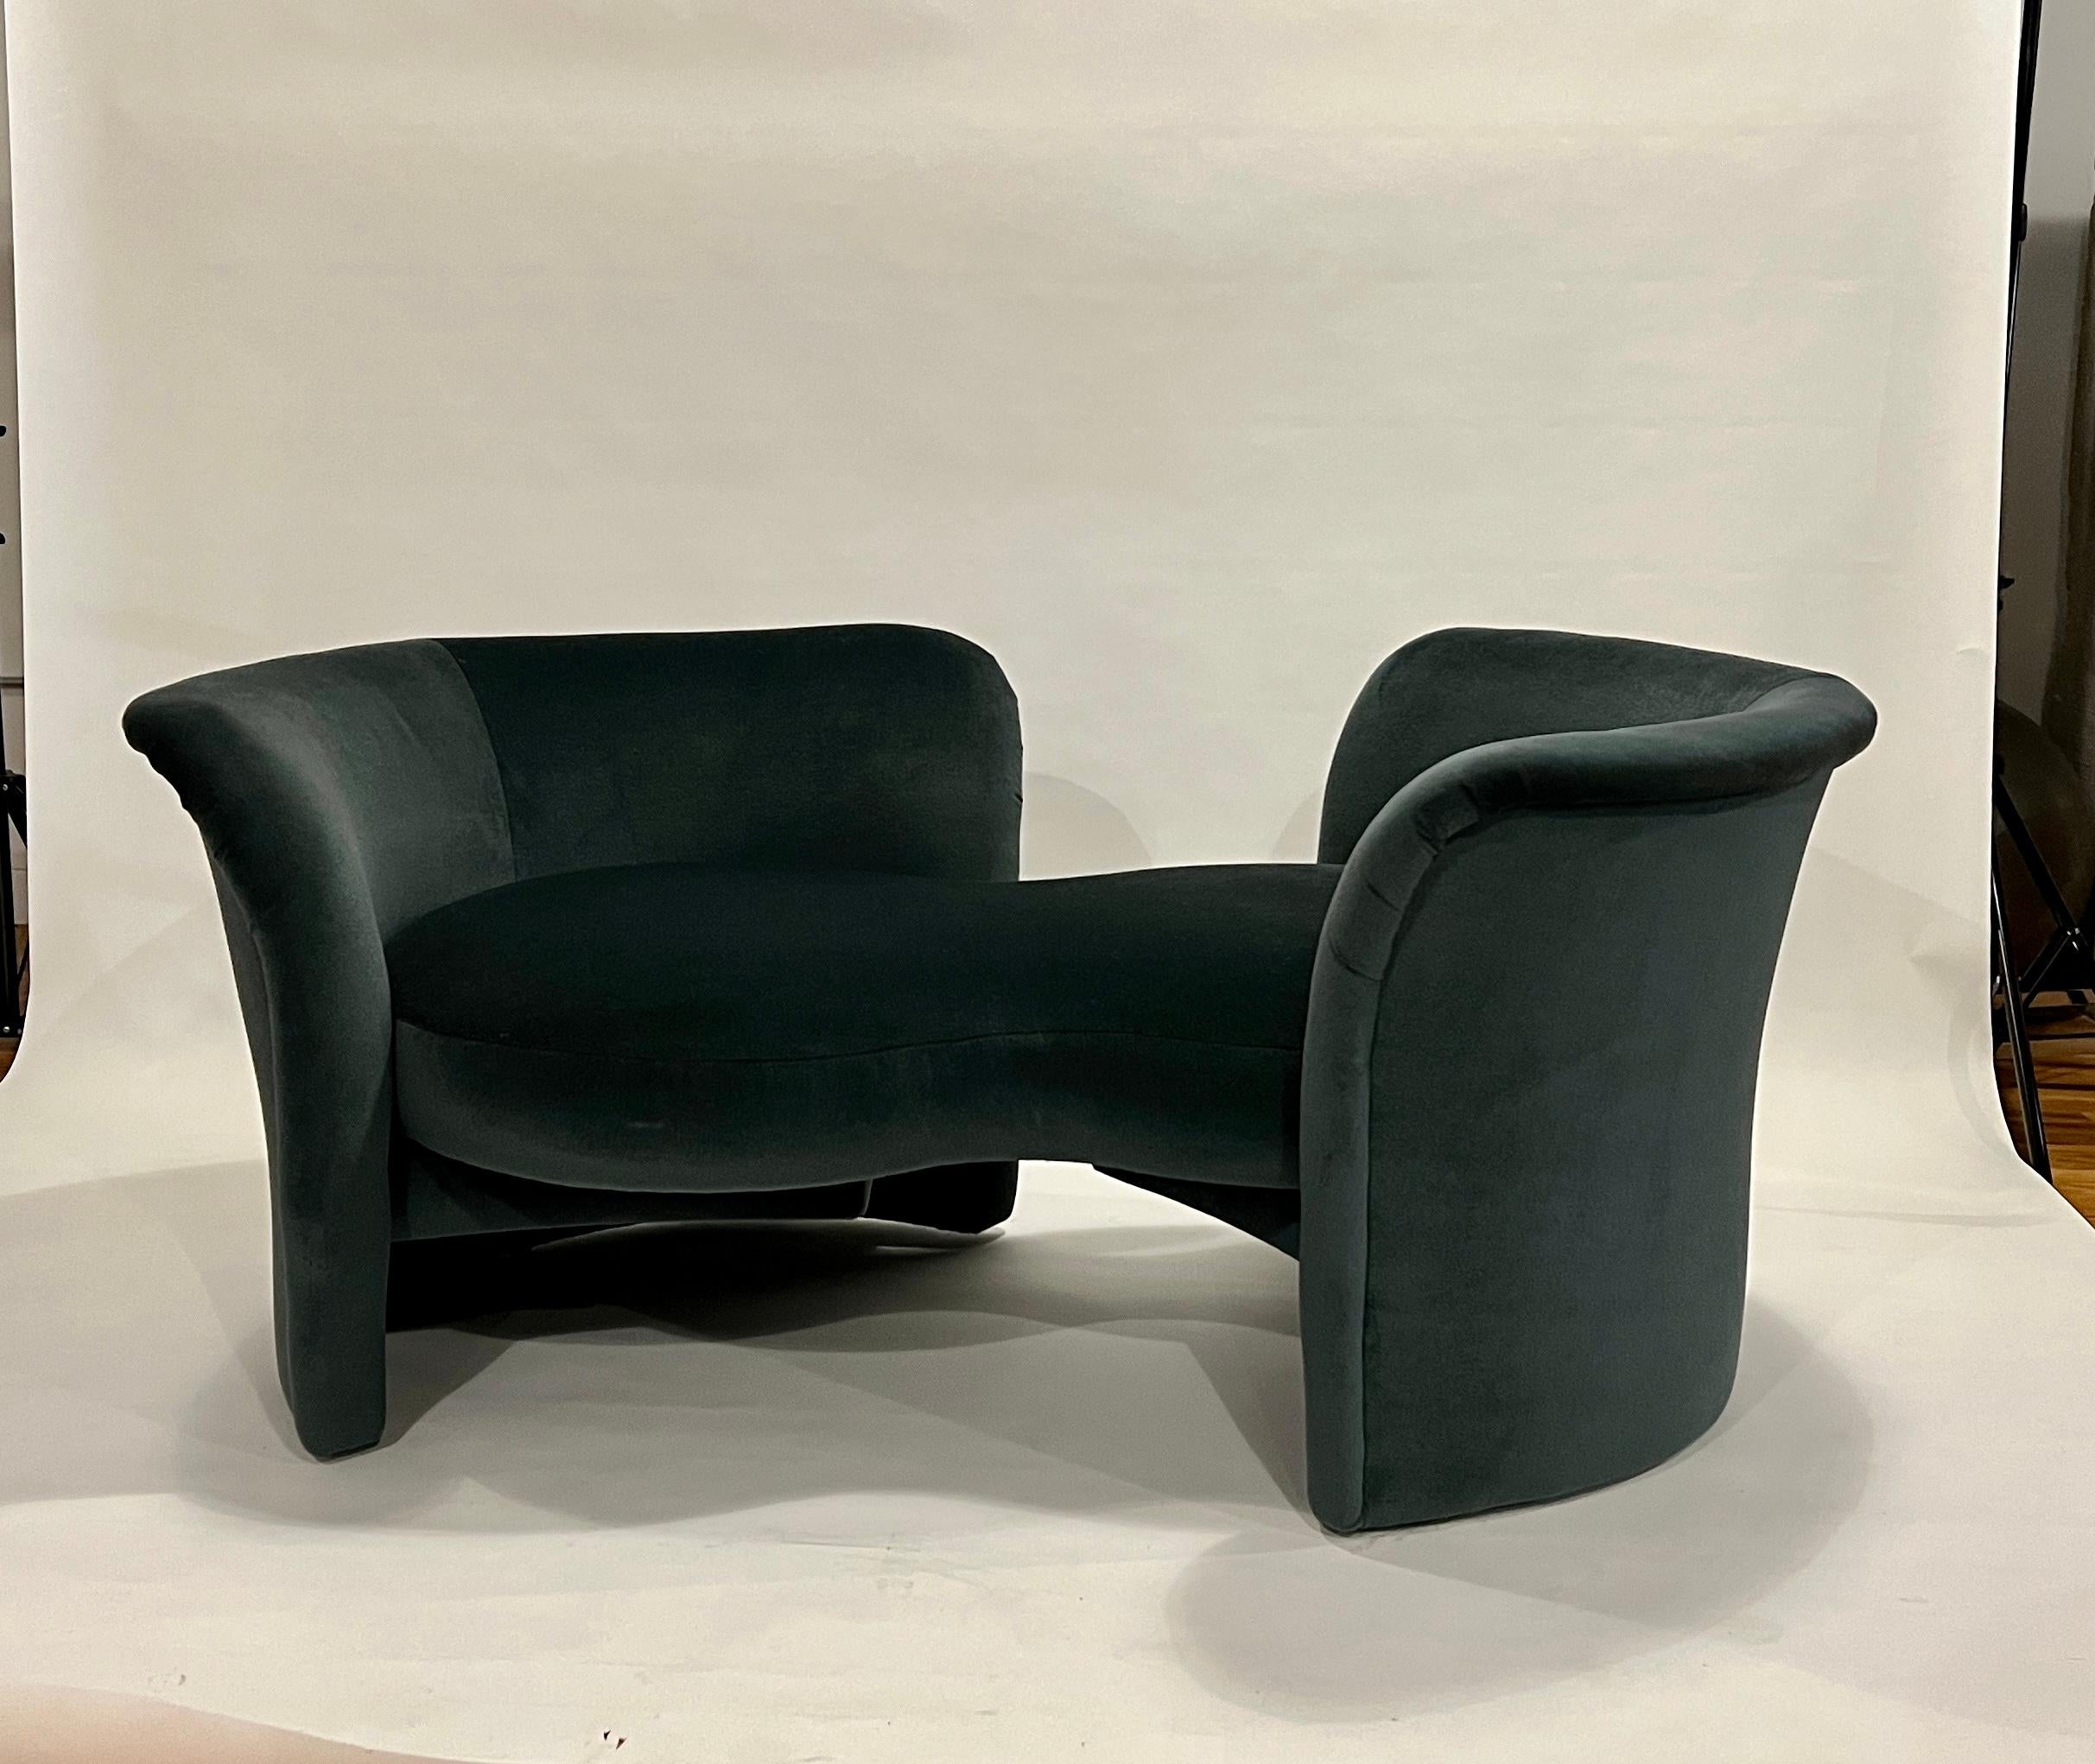 Milo Baughman loveseat with swivel arms to transform from a loveseat to a tete-a-tete. This 20th century Thayer Coggin classic sofa has been newly restored in a dark teal mohair with pale bluish-cream color mohair pillows.